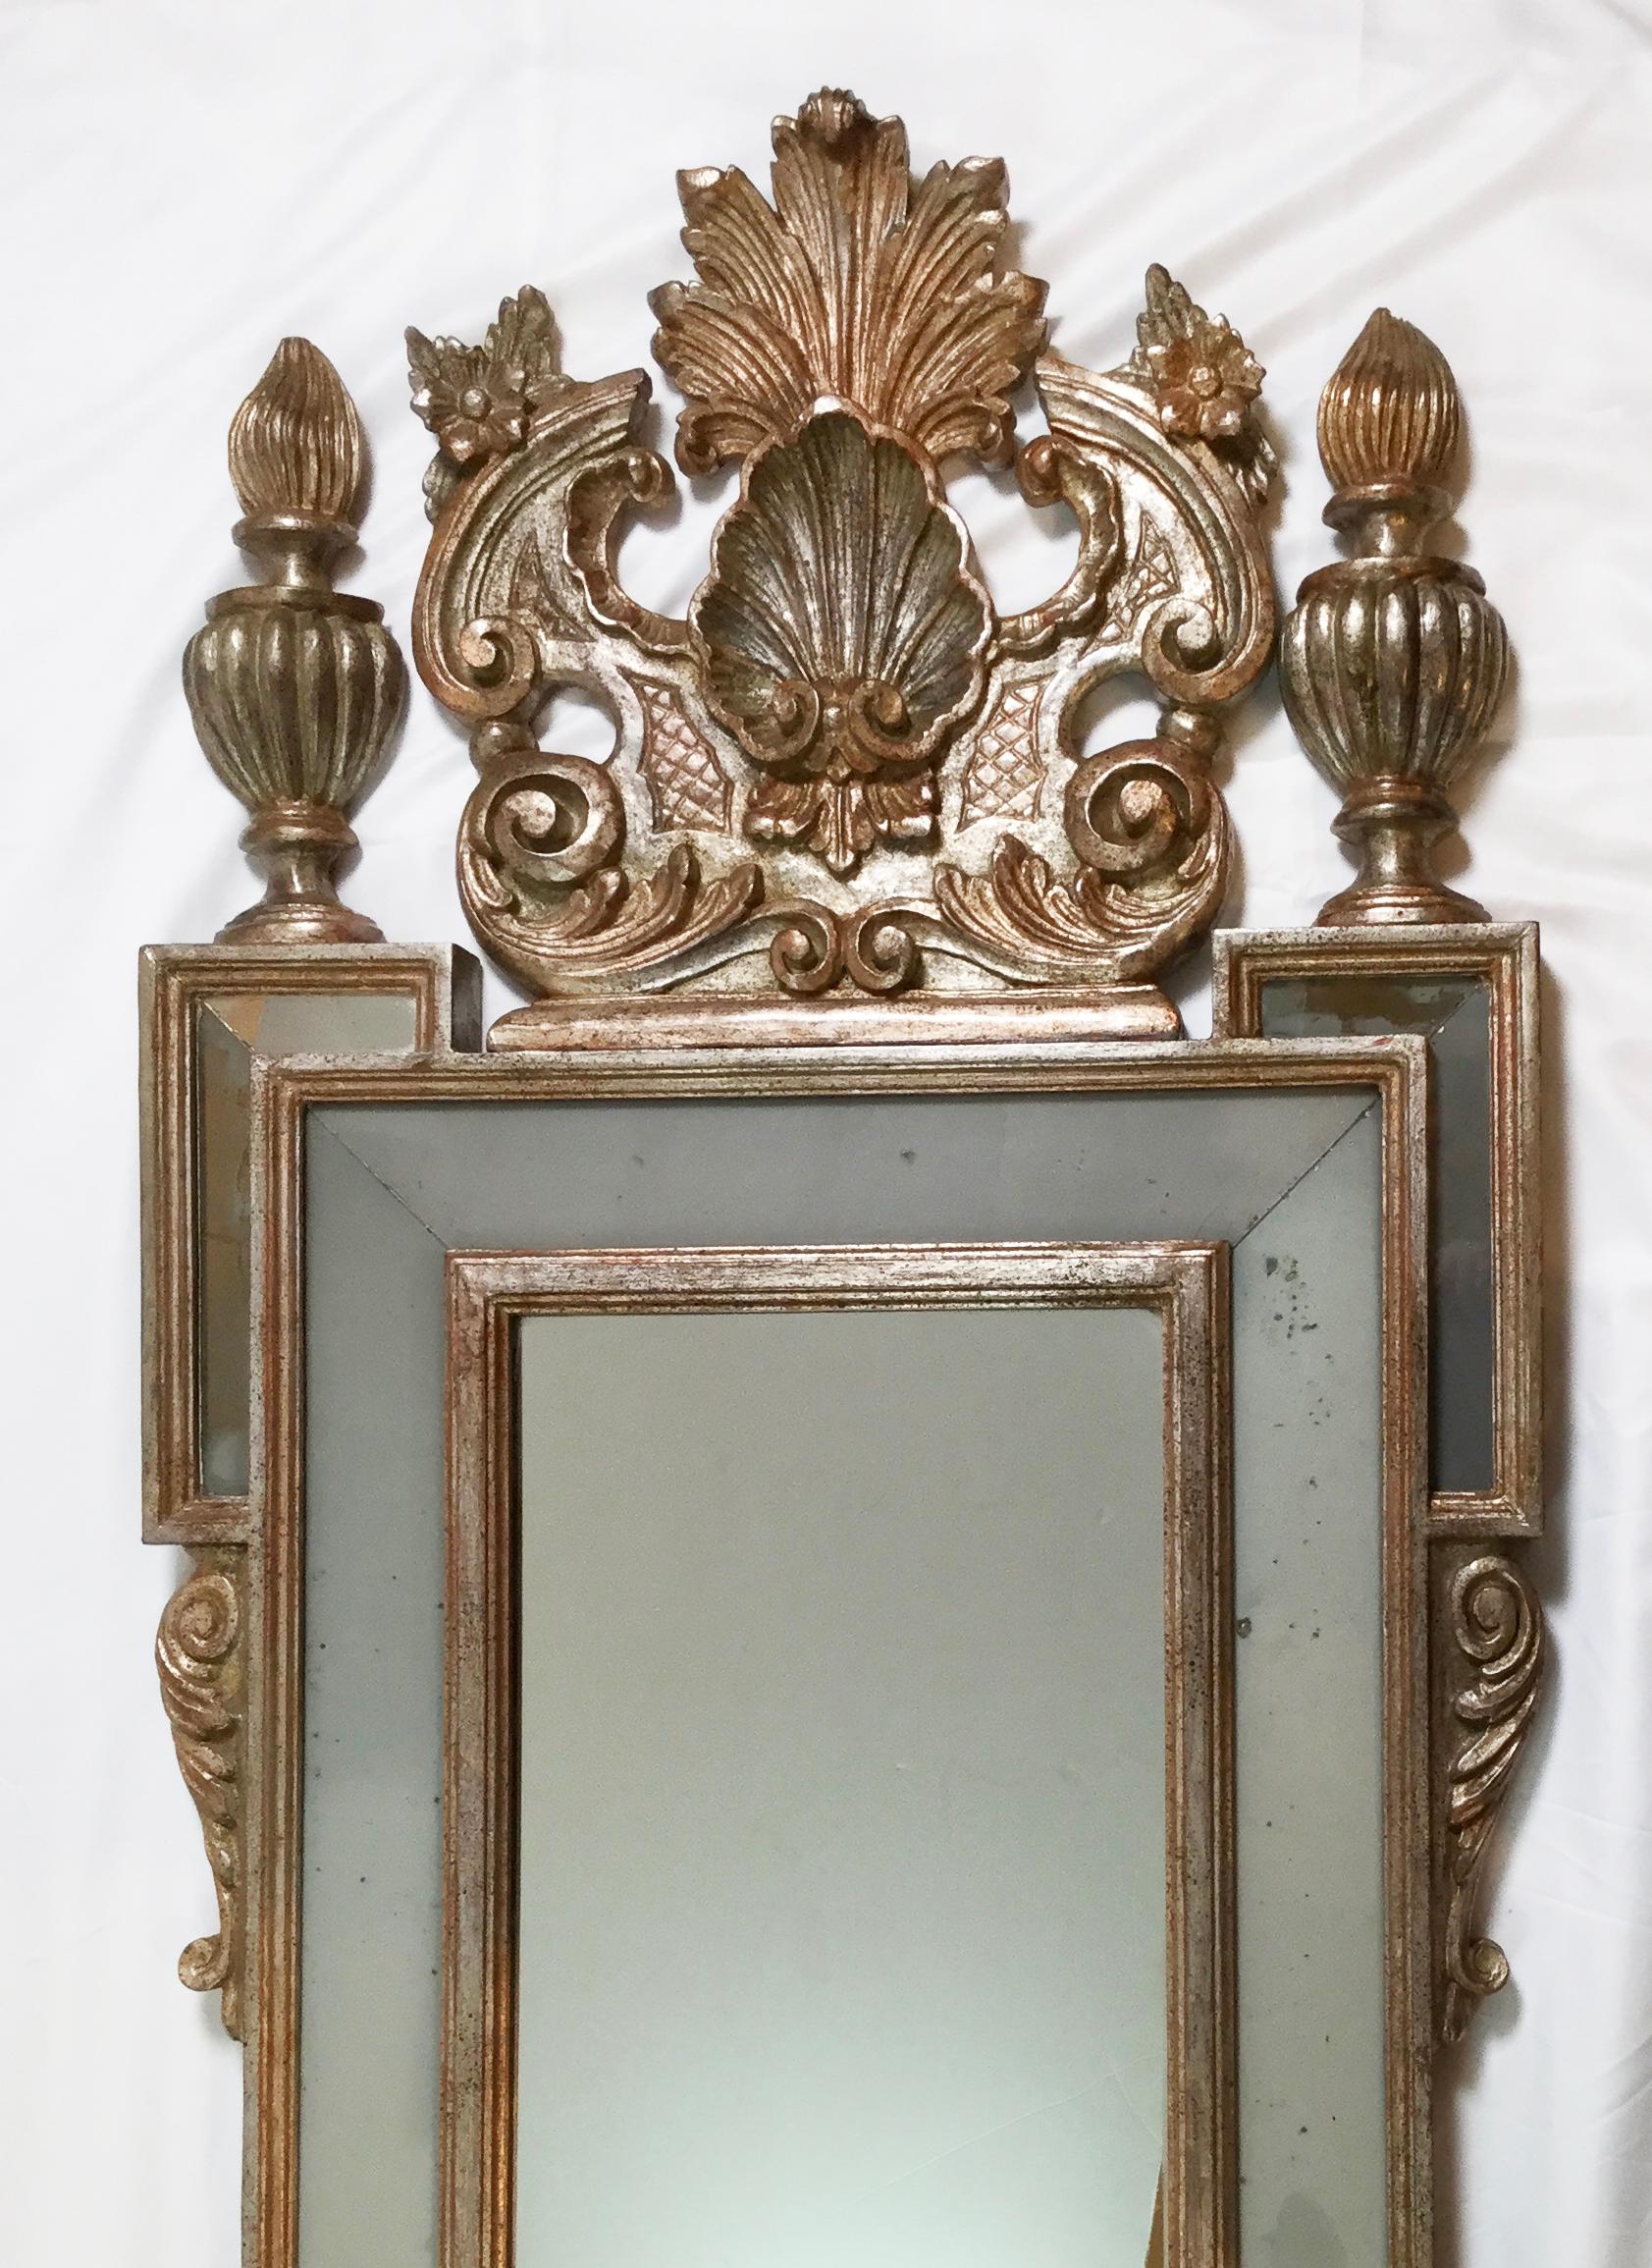 Regal silver giltwood mirror with elaborate frame. The top pediment with shell and plume with flanked finials with a soft gray églomisé glass inserts. Beautiful mirror with a slim profile of 25.25 inches and 63 inches tall. The surface is a warm